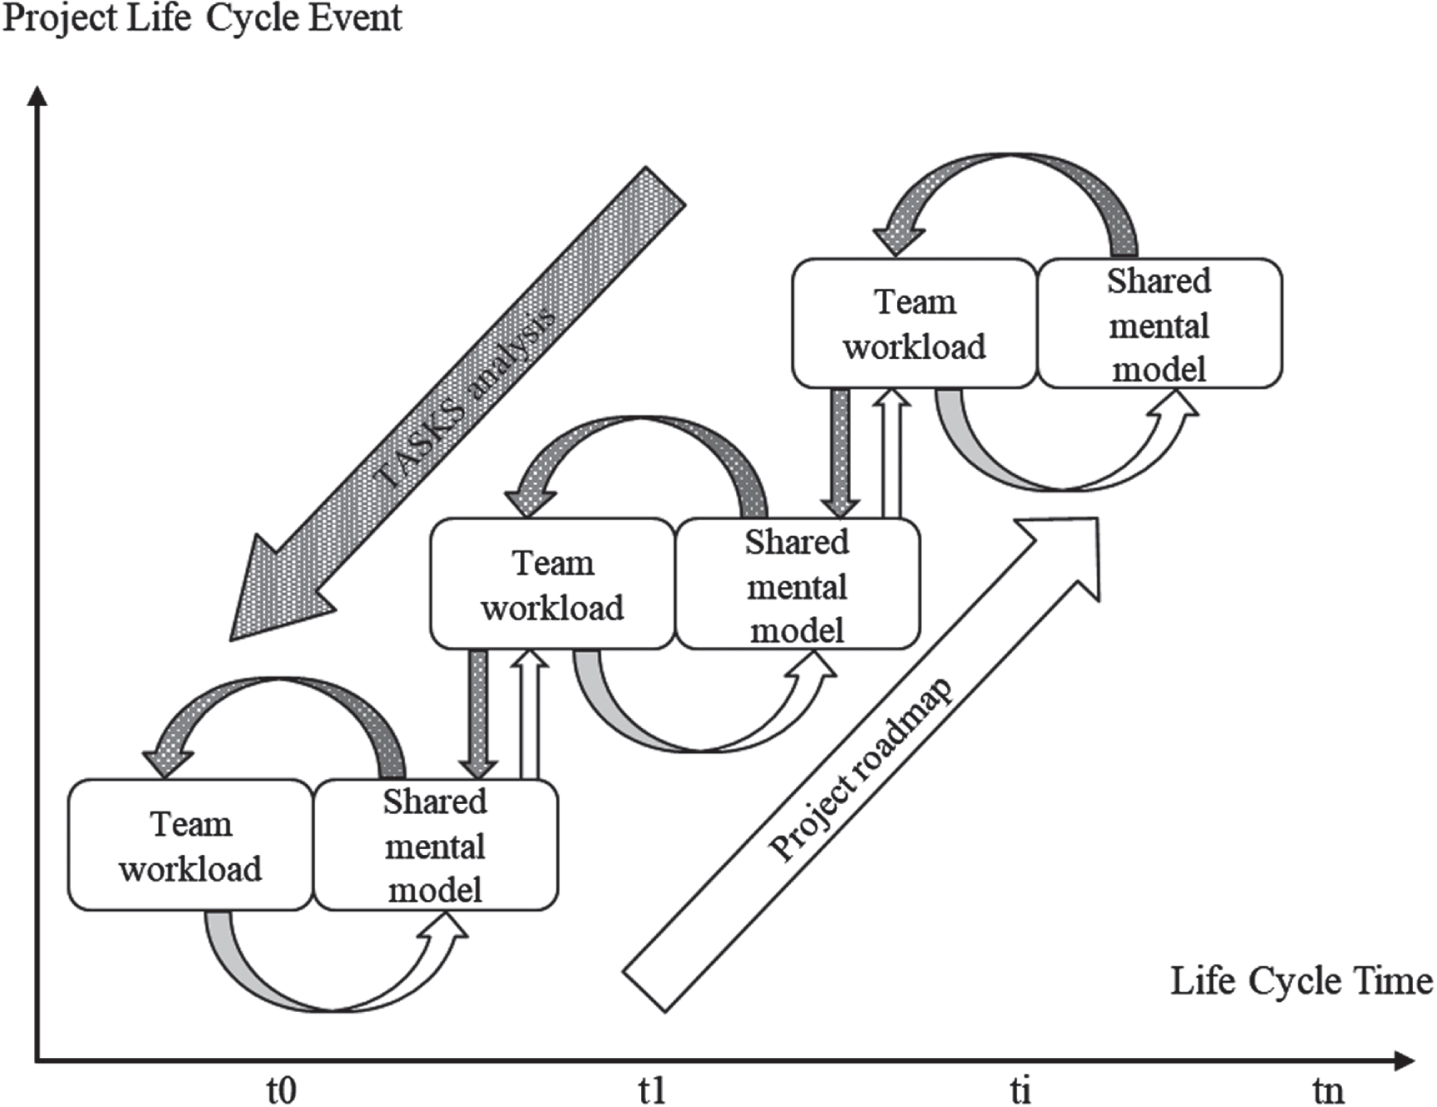 Life cycle analysis of project road map to identify stepwise workload during the research conduct. Adapted from Zeng, Y. (2015). Environment-Based Design (EBD): a Methodology for Transcapillary Design. Journal of Integrated Design and Process Science, 19(1), 5-24.